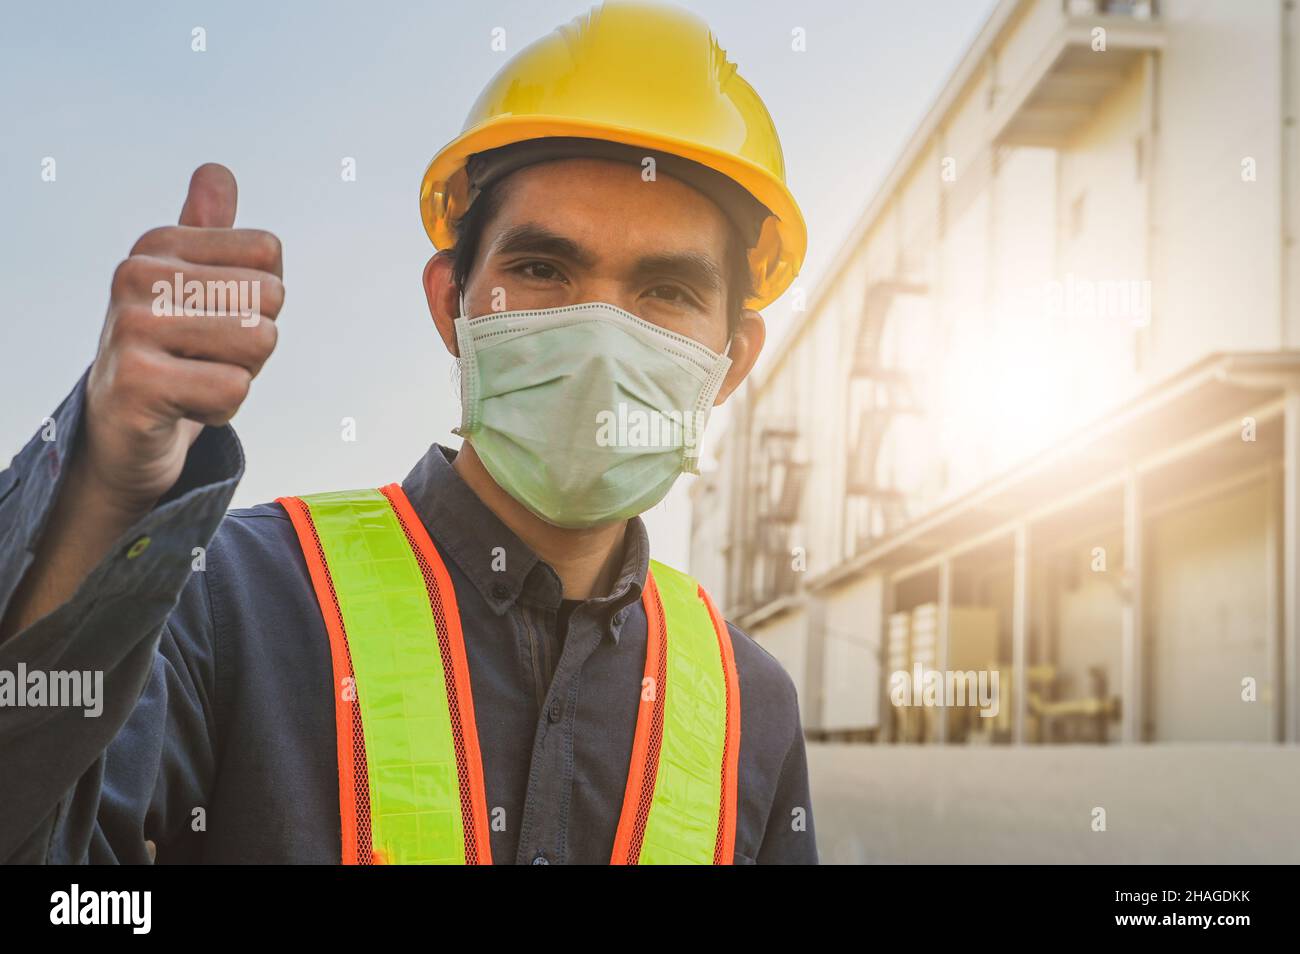 Engineer standing factory plant background , Technician workplace manufacturing maintenance facility Stock Photo